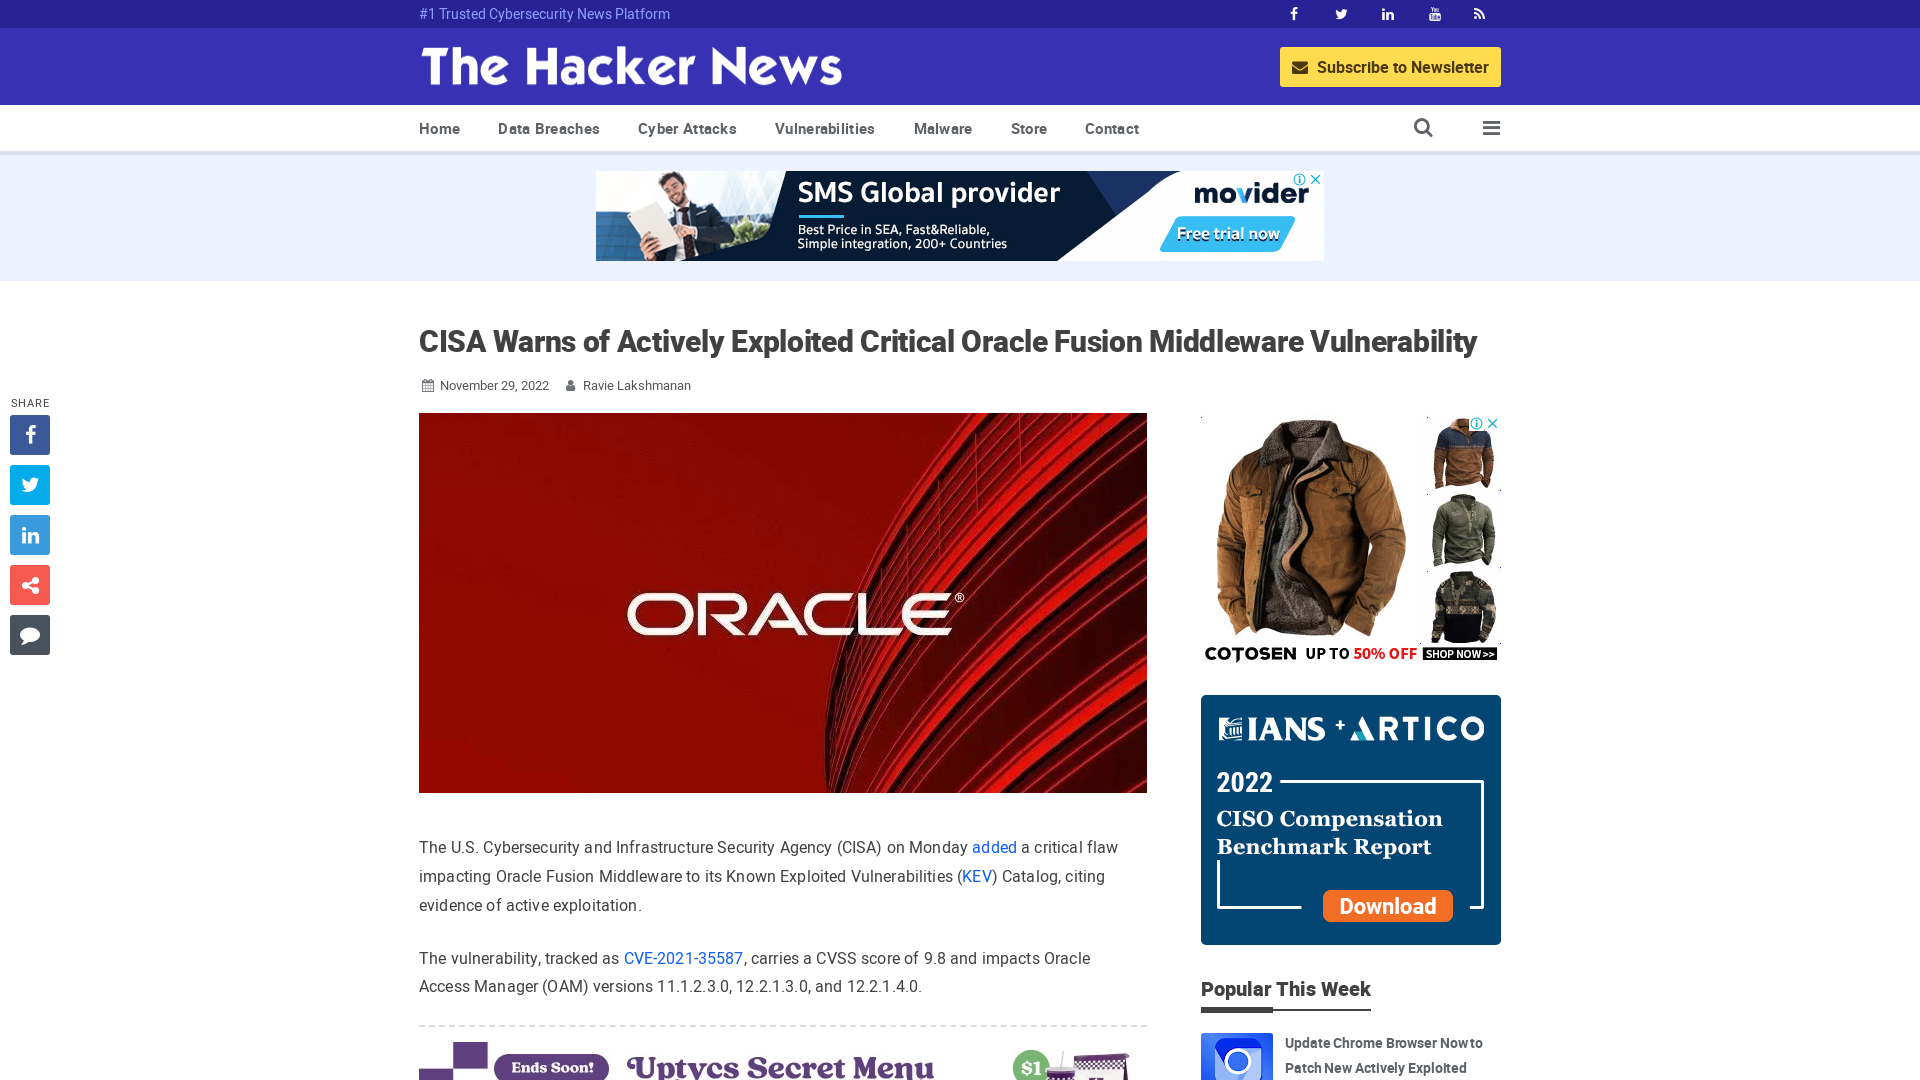 CISA Warns of Actively Exploited Critical Oracle Fusion Middleware Vulnerability